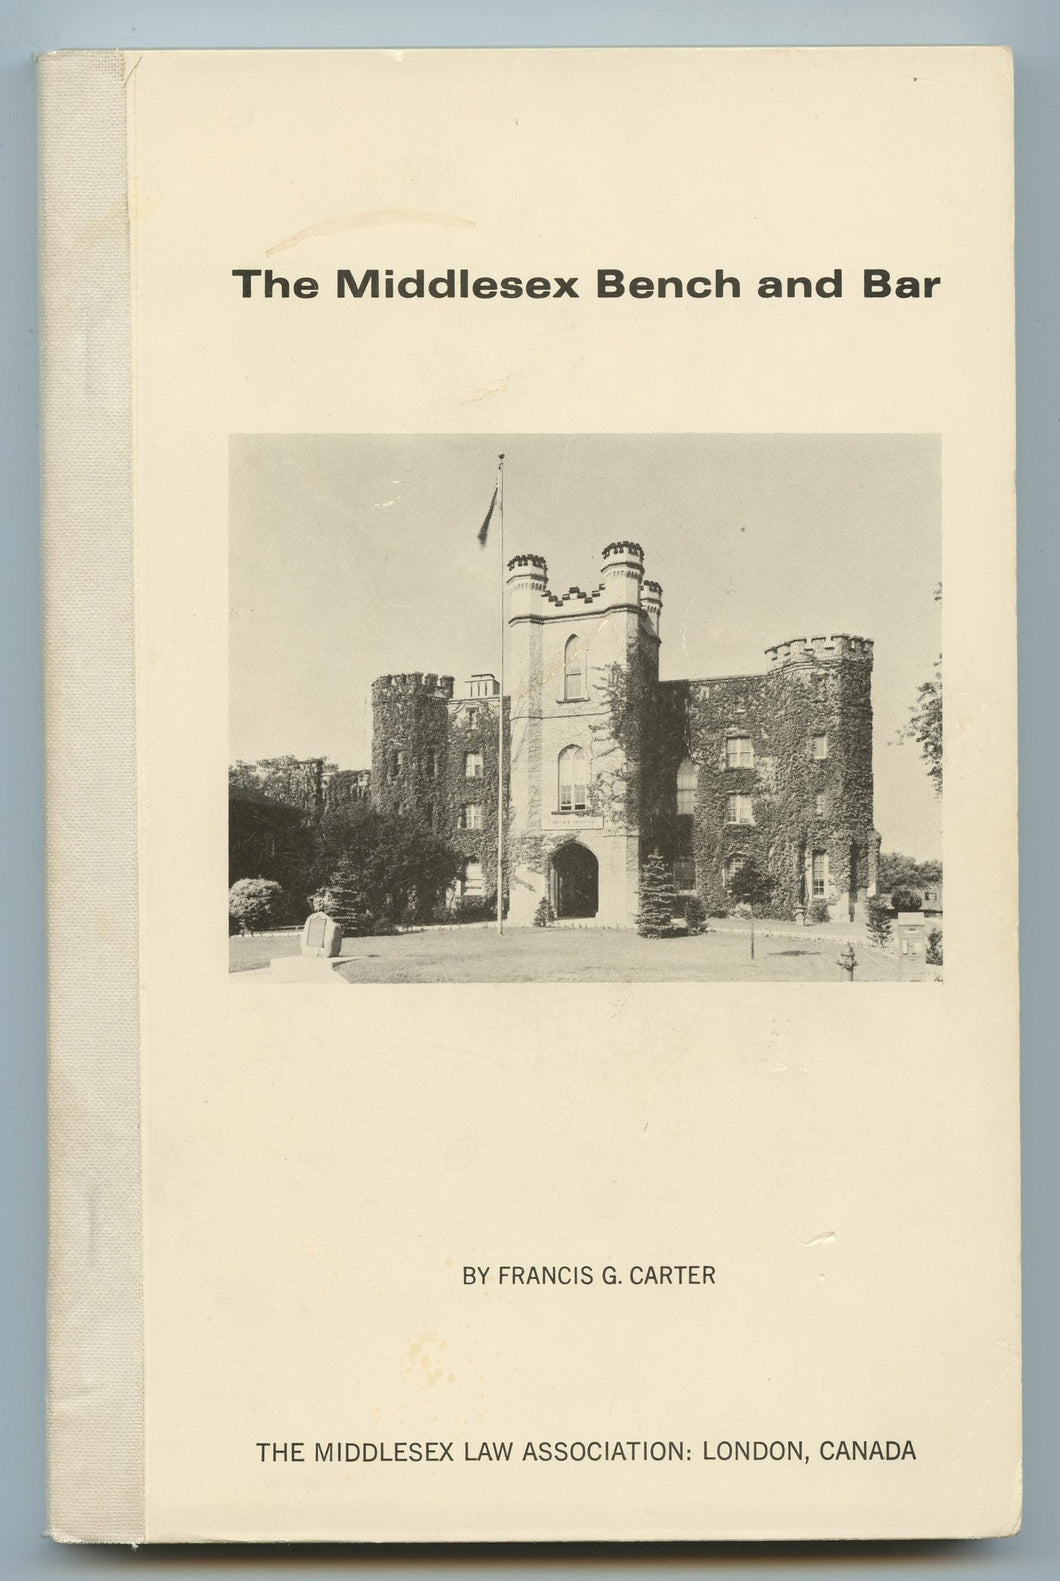 The Middlesex Bench and Bar